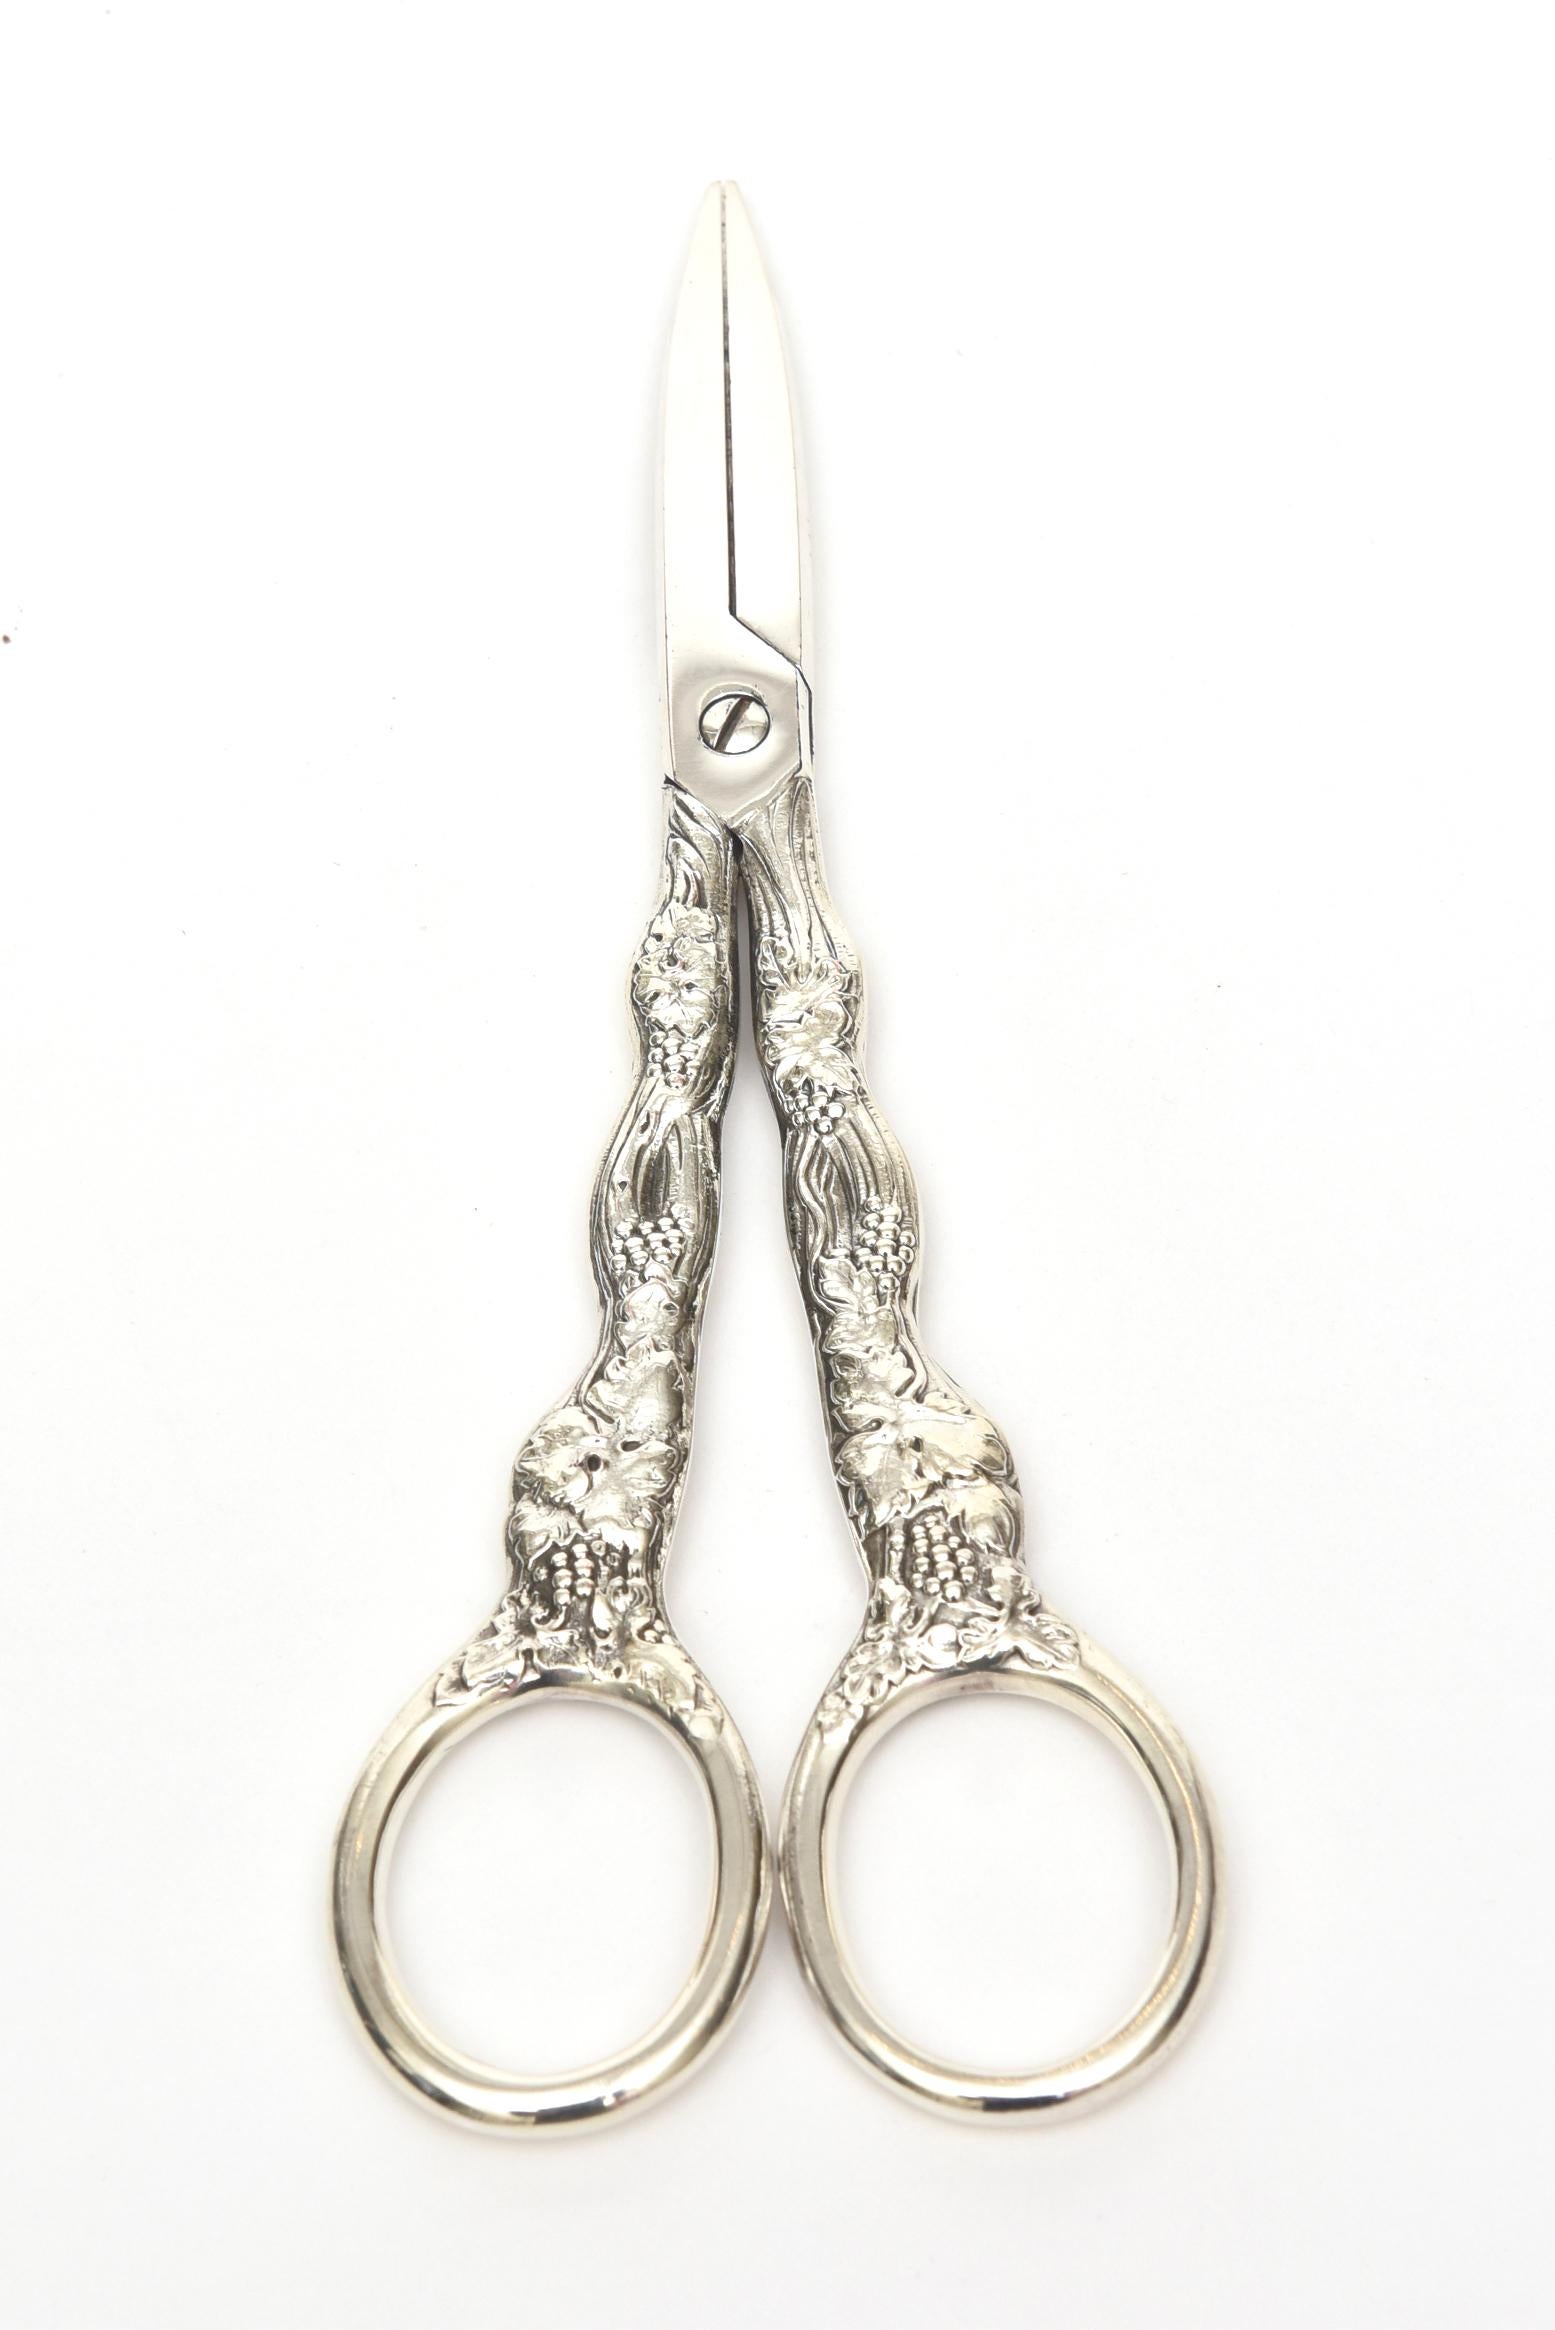 These lovely French sterling silver Christofle grape shears are marked Christofle France. They have the lovely design of chased grape and vine in raised pattern. They are Classic and timeless for serving and preparation for your grapes.